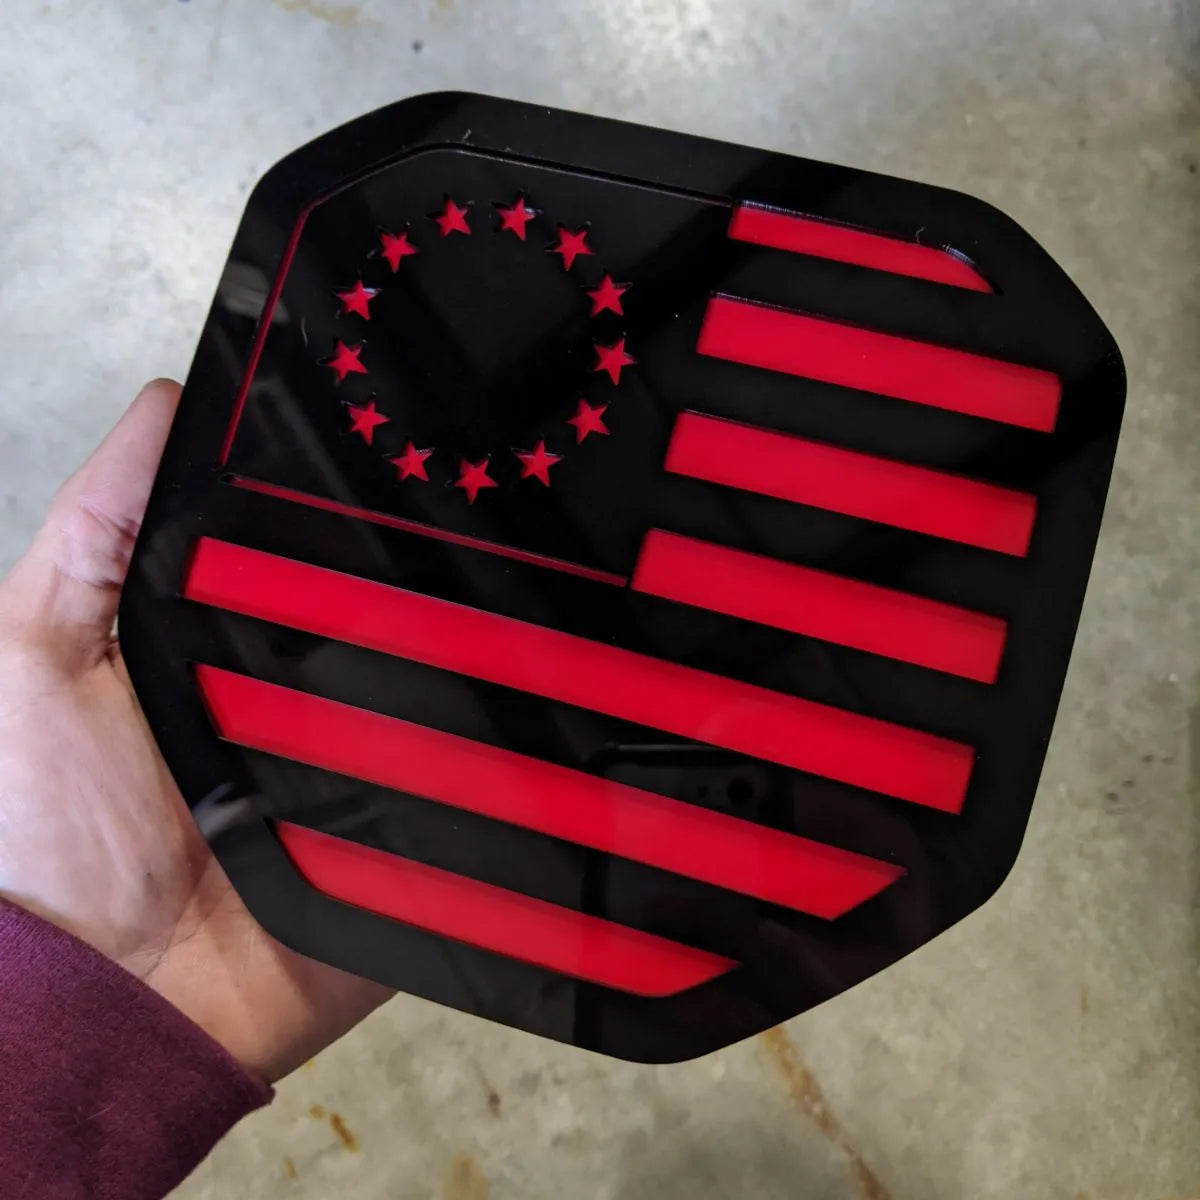 Betsy Ross American Flag Badge - Fits 2019+ (5th Gen) Dodge® Ram® Tailgate -1500, 2500, 3500 - Black on Red